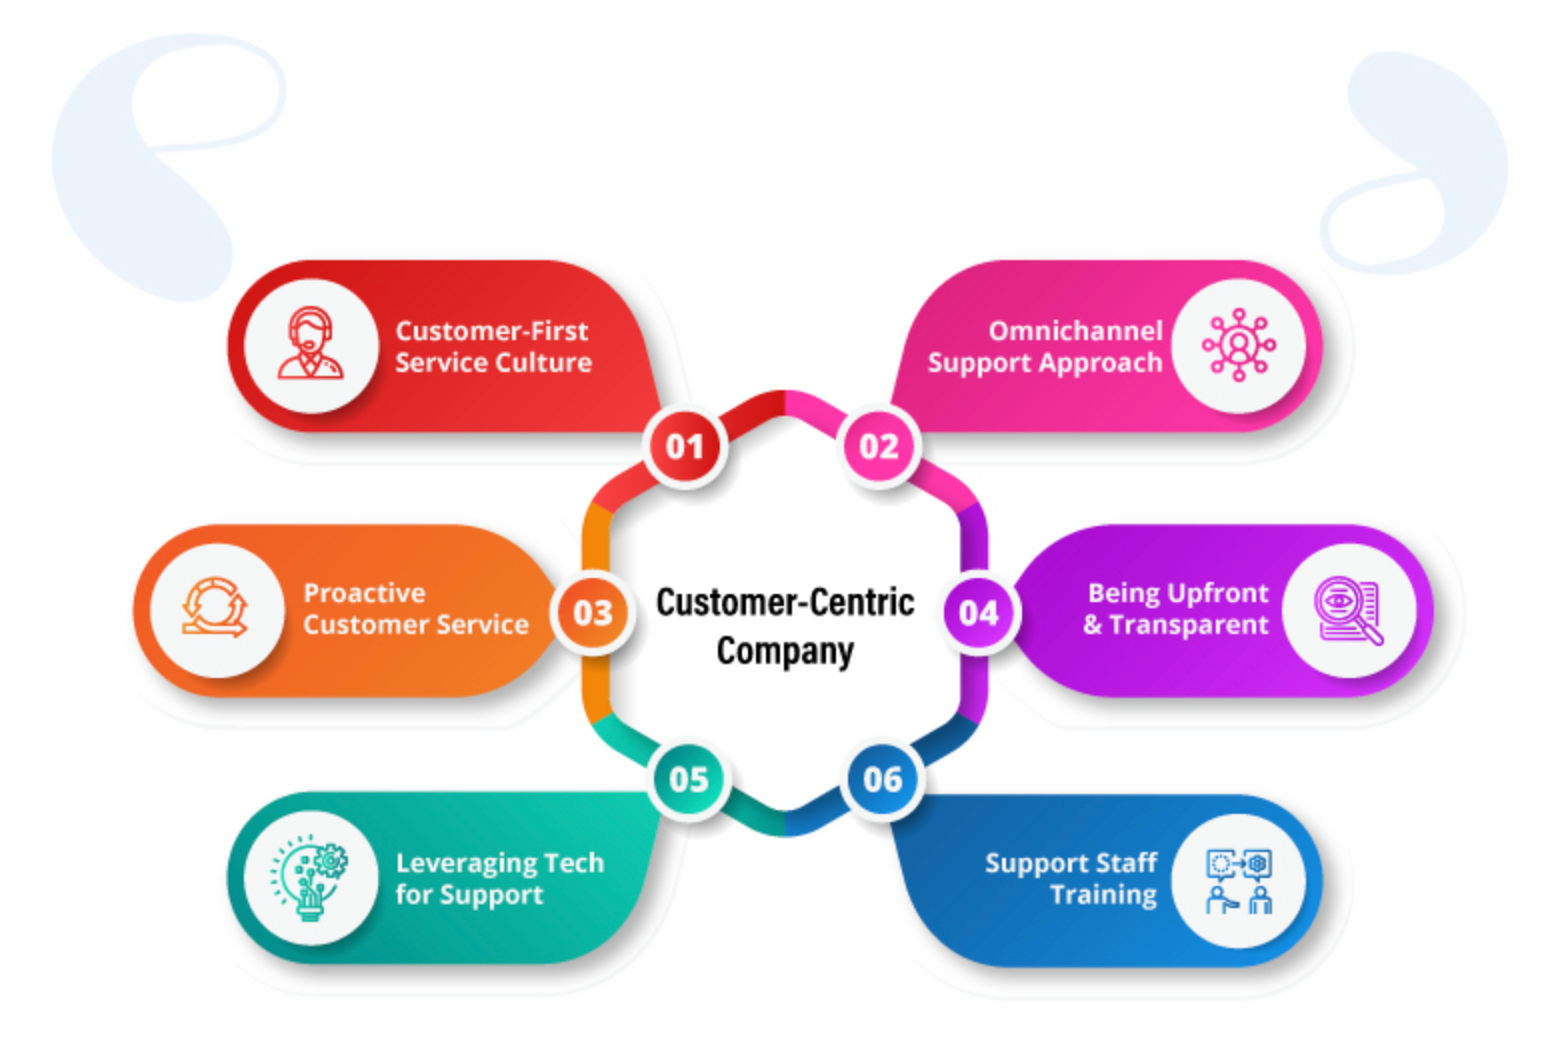 The Customer-Centric Company. Source: Simplicity 360.